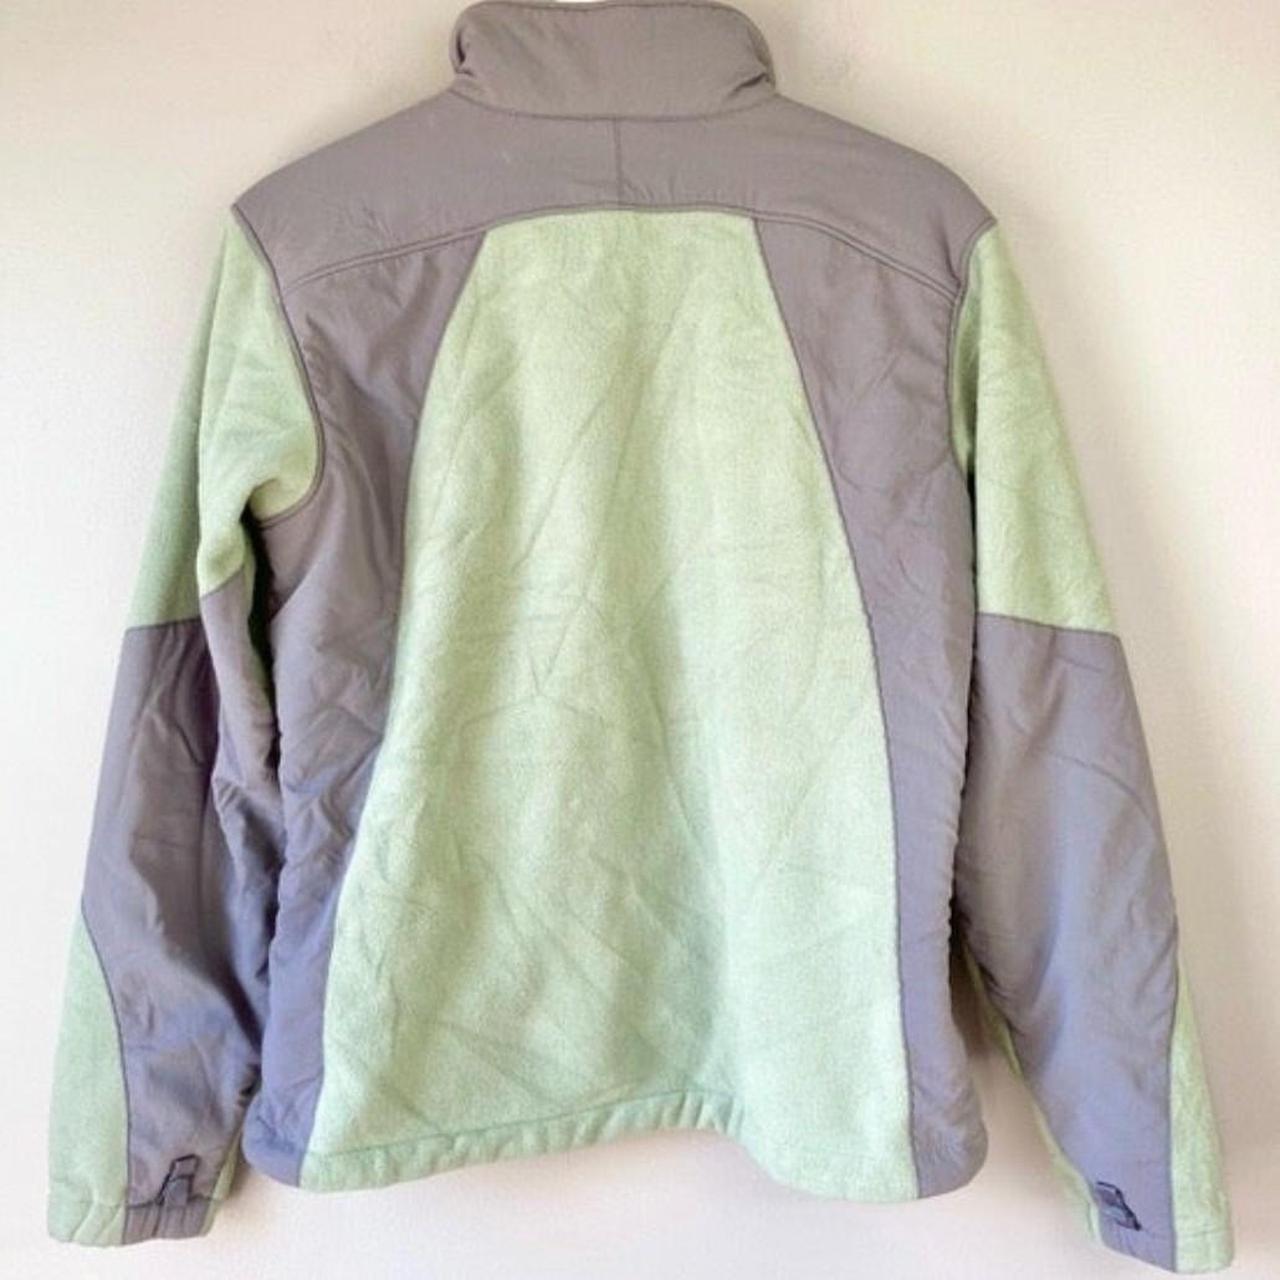 The North Face Women's Green and Grey Jacket (2)